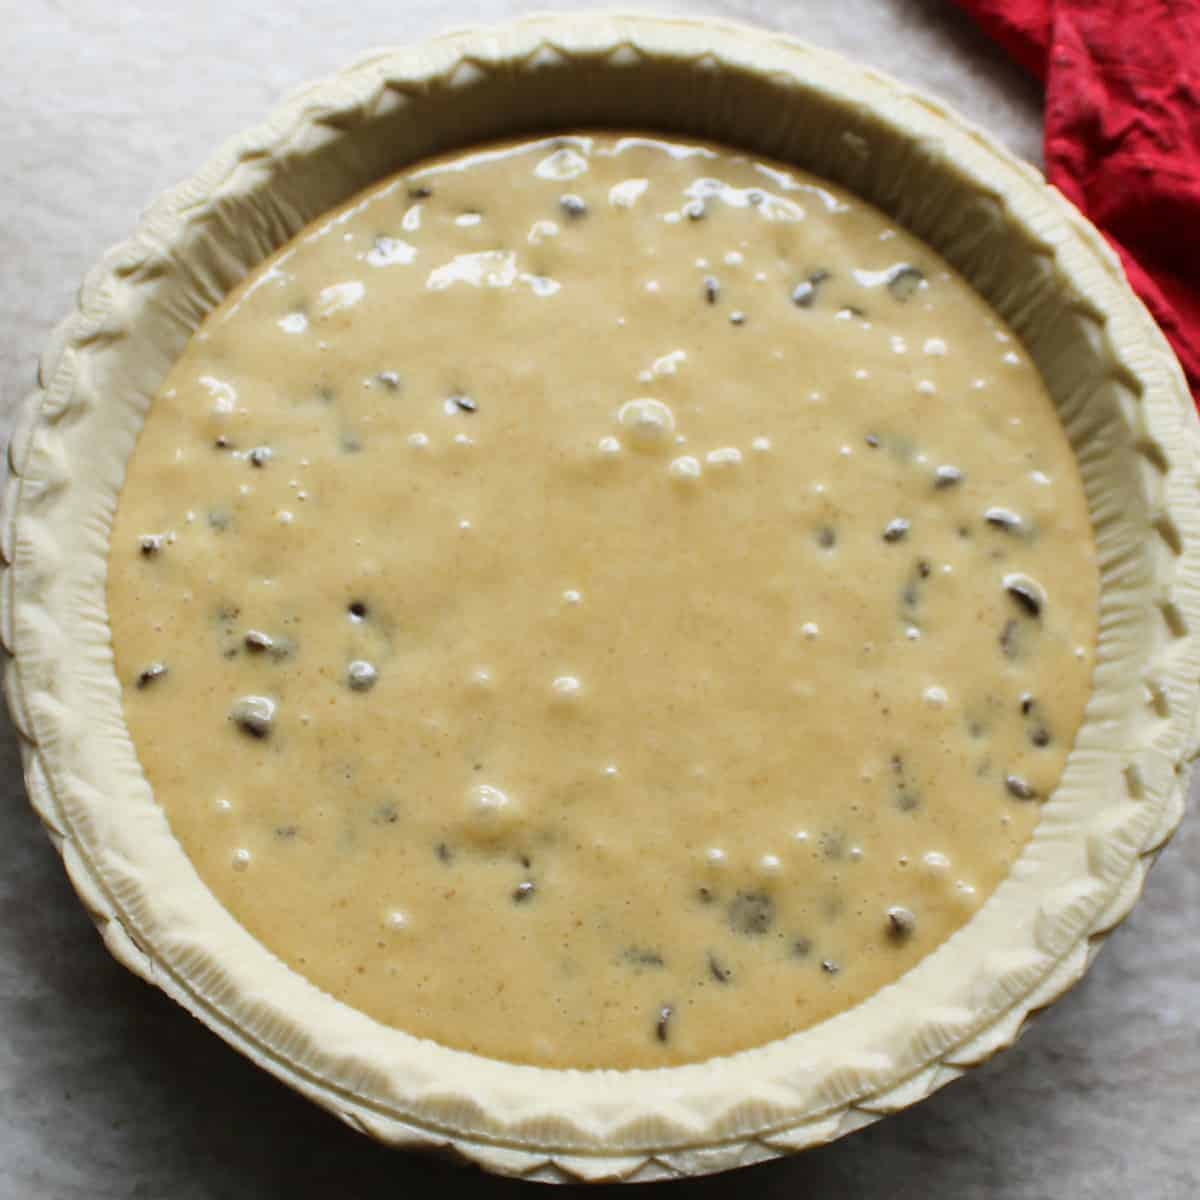 stir in chocolate chips and pour into crust